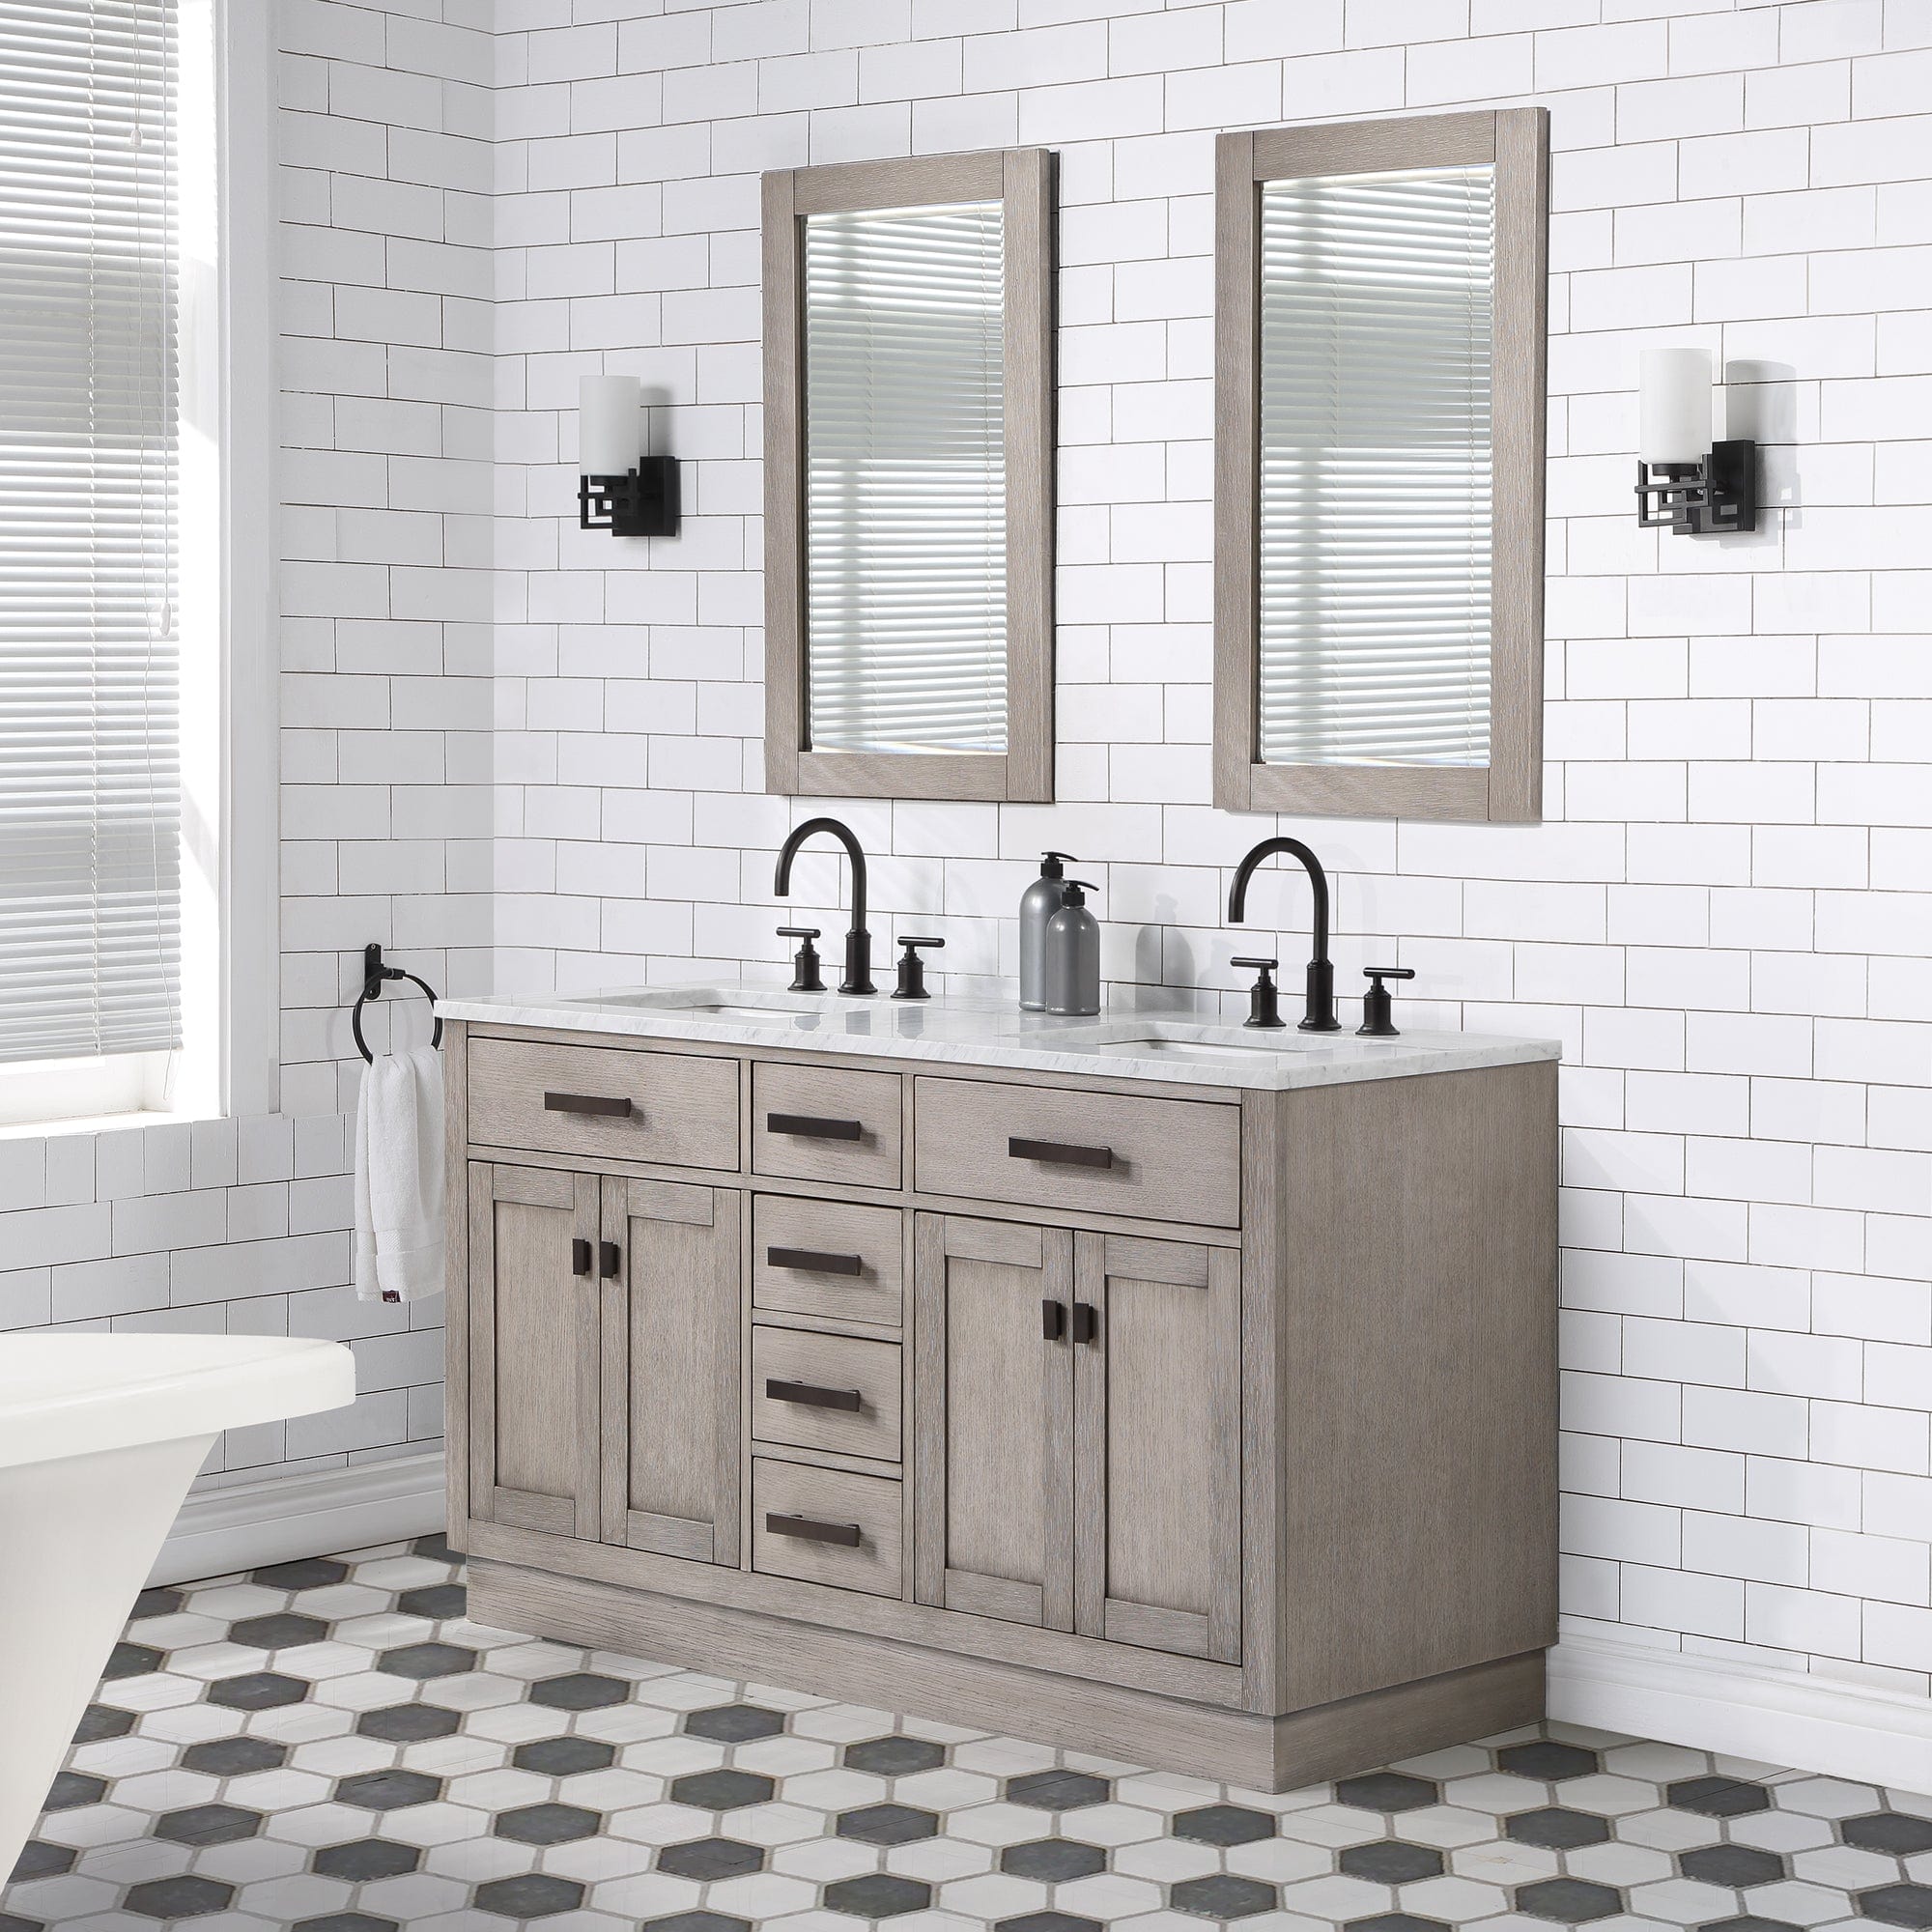 Chestnut 60 In. Double Sink Carrara White Marble Countertop Vanity In Grey Oak with Grooseneck Faucets - Molaix732030764811CH60CW03GK-000BL1403